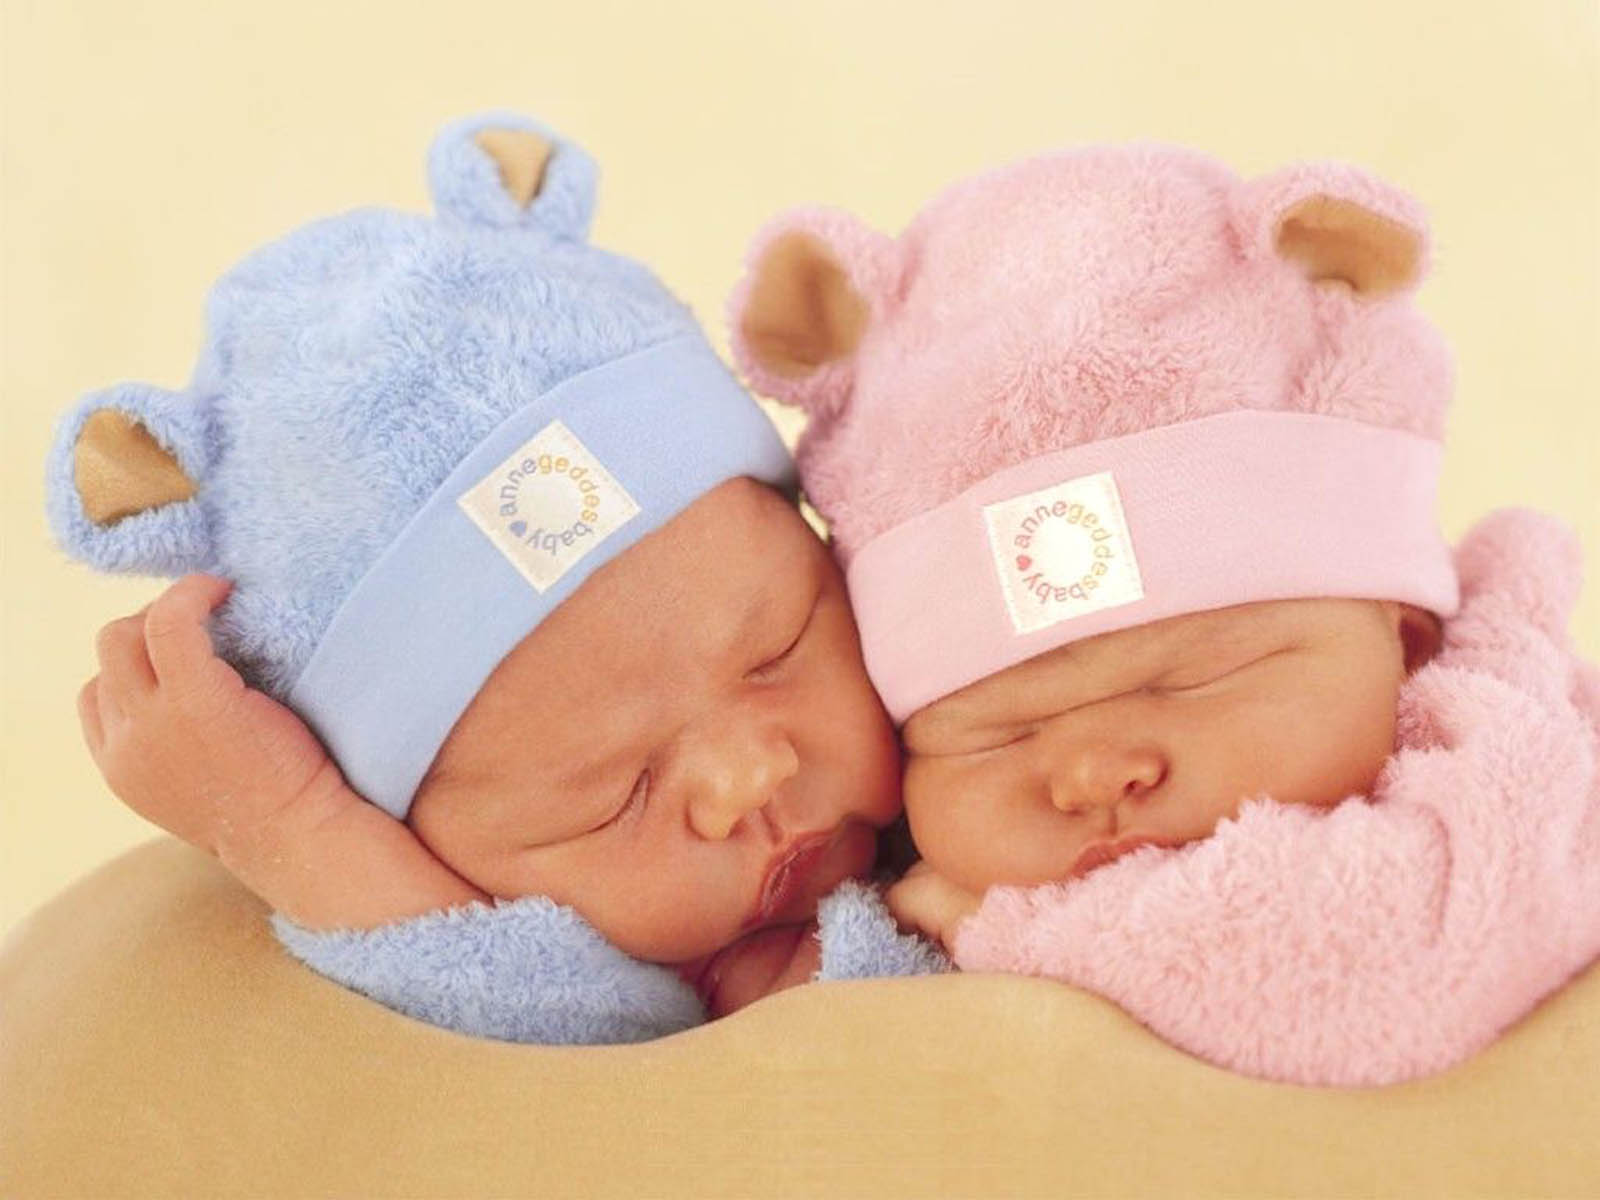 Sleeping Babies Wallpaper Image Photos Pictures And Background